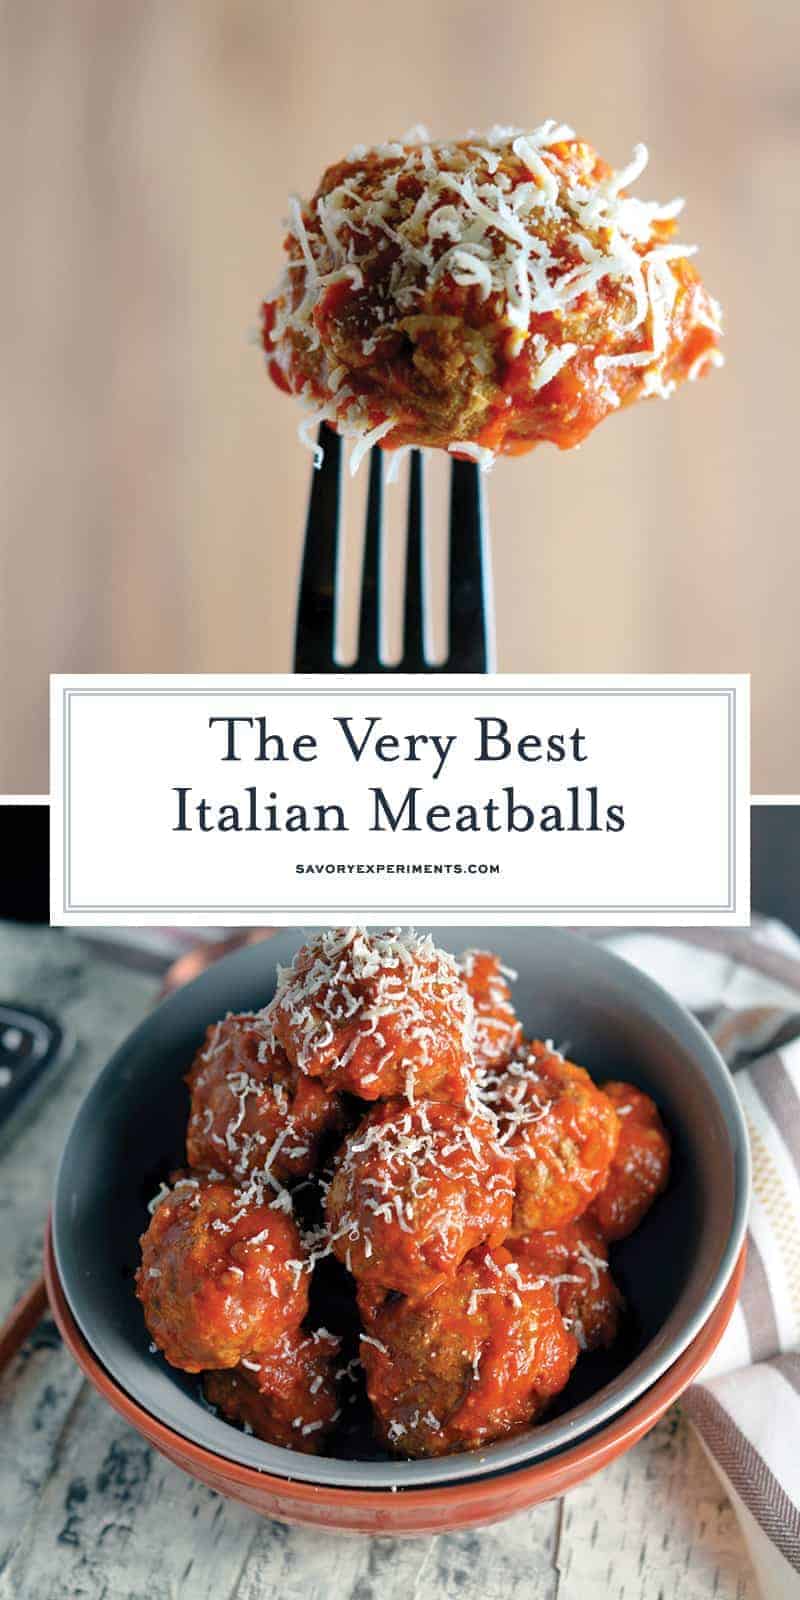 Best Italian Meatballs uses a blend of meat, spices and one special ingredient to make the tastiest, fork-tender meatballs you've ever seen! #italianmeatballs #meatballrecipe www.savoryexperiments.com 